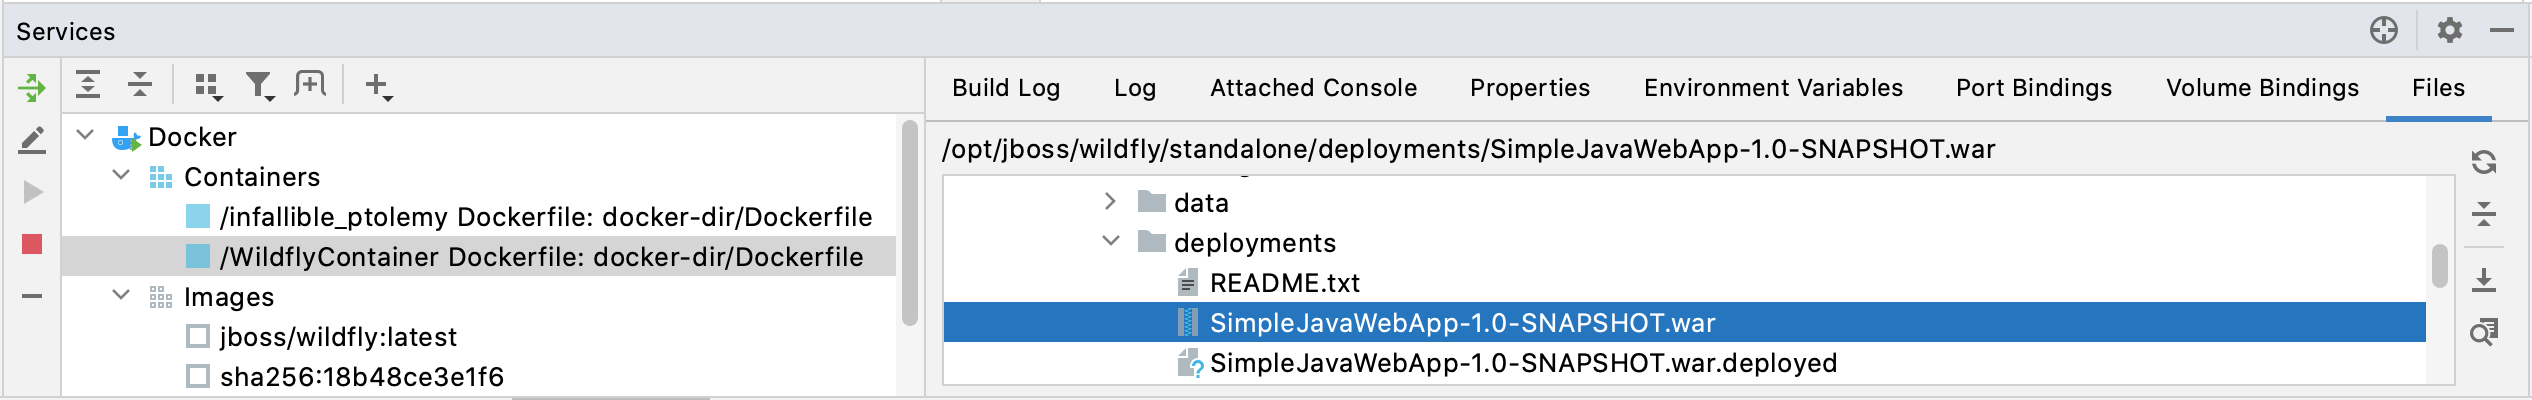 Services tool window with running Wildfly container and deployed Java app